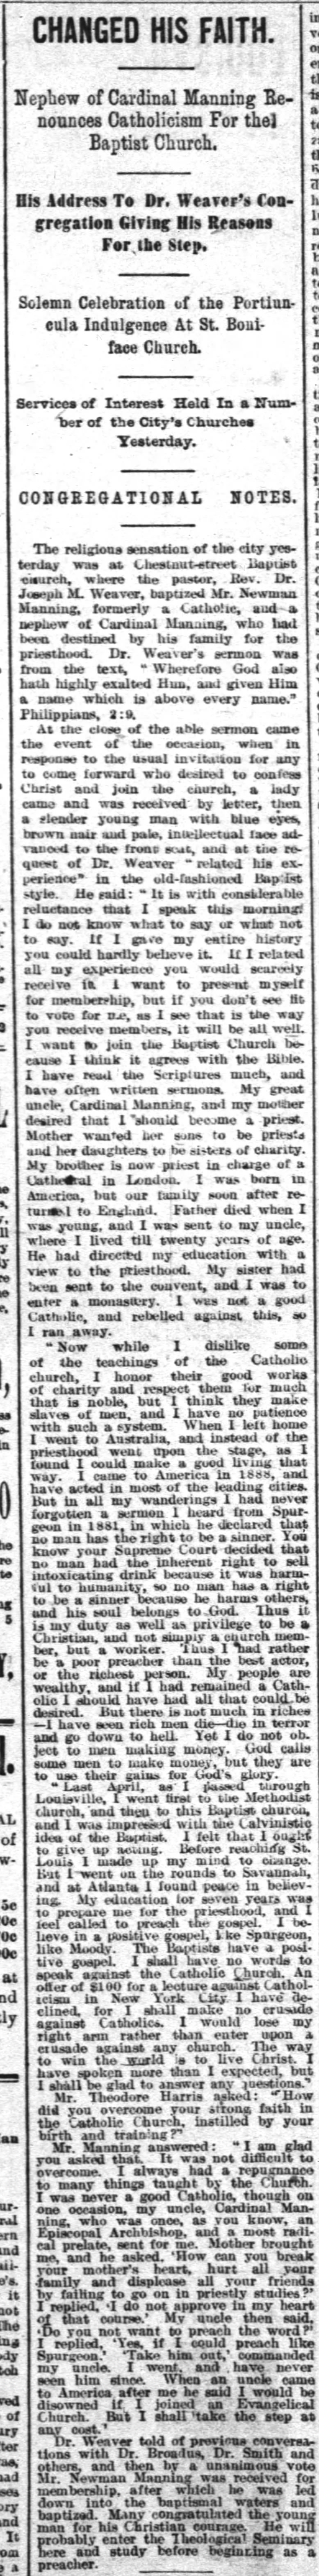 August 8 1892
Nephew of Cardinal changes his faith